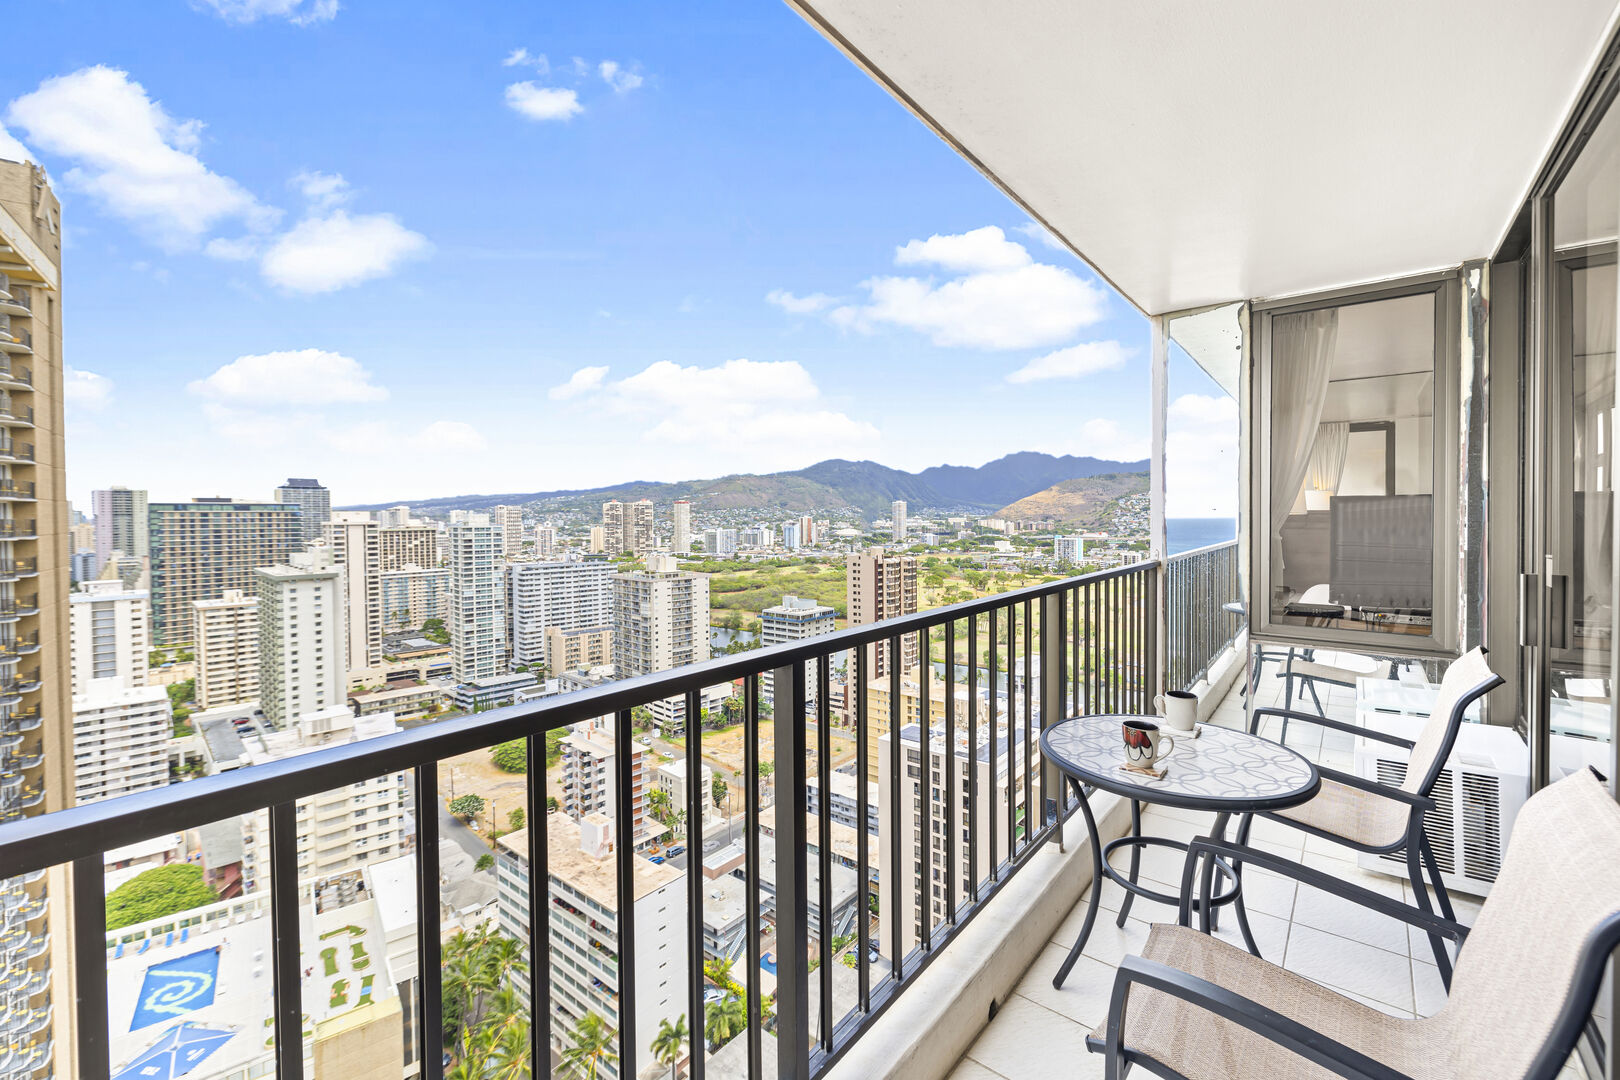 Beautiful mountain and city views from your balcony!